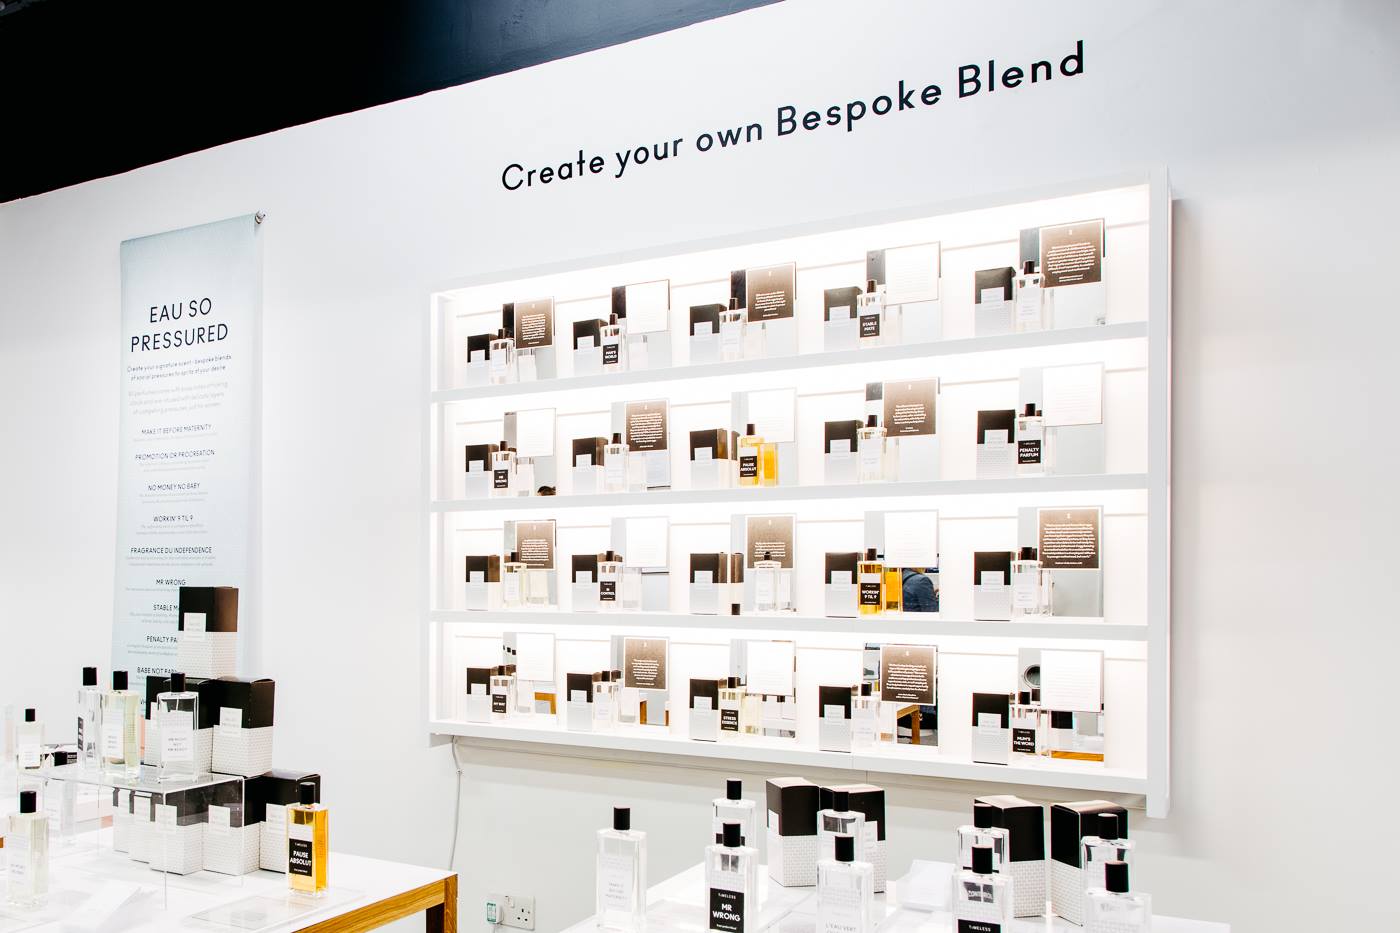 Create your own Bespoke Blend